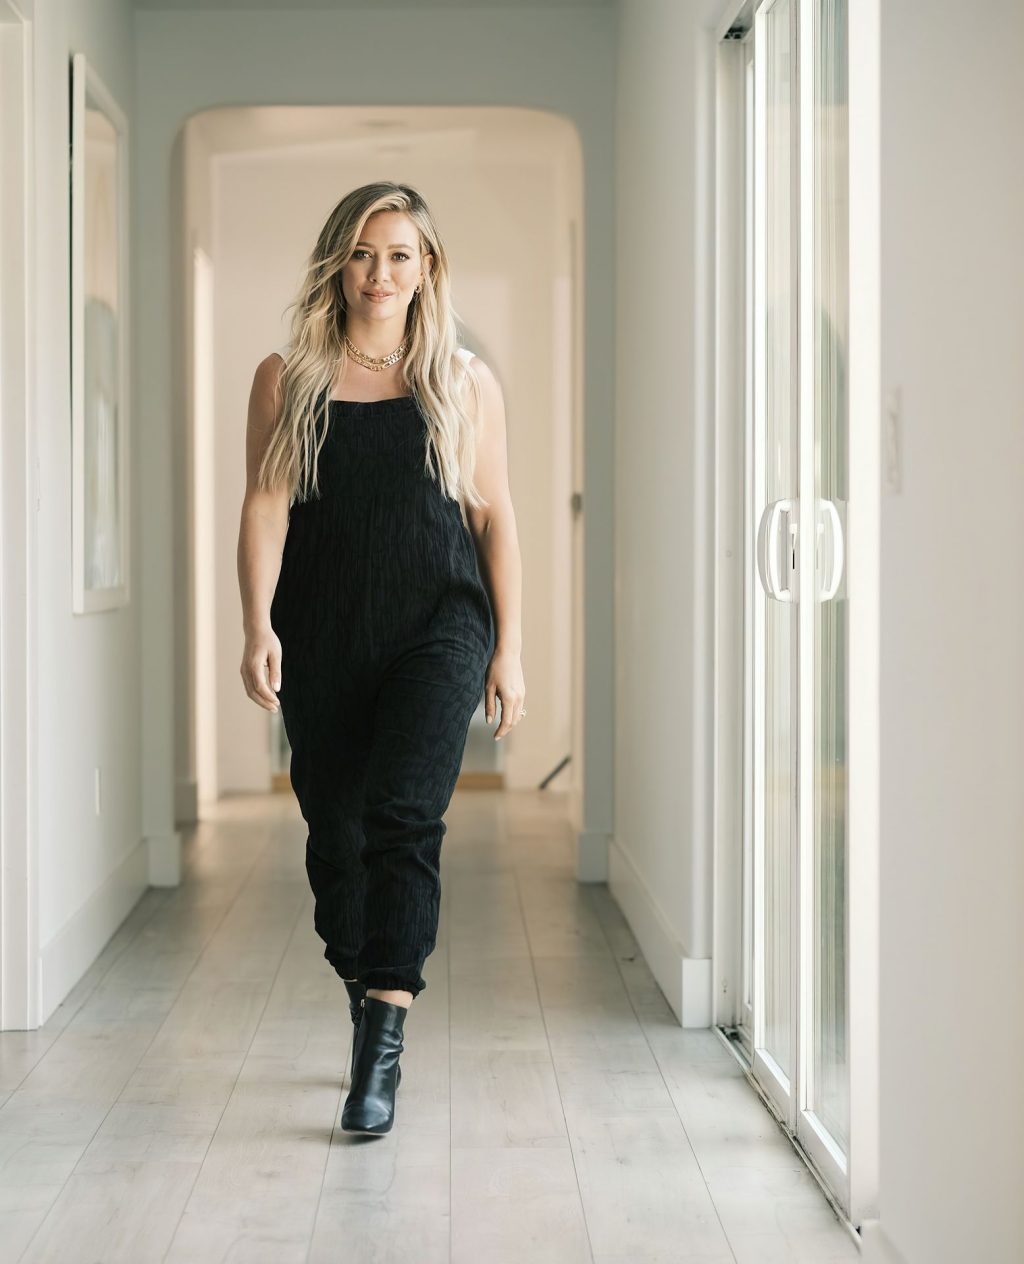 Hilary Duff Presents Her Smash + Tess Collection (17 Photos)